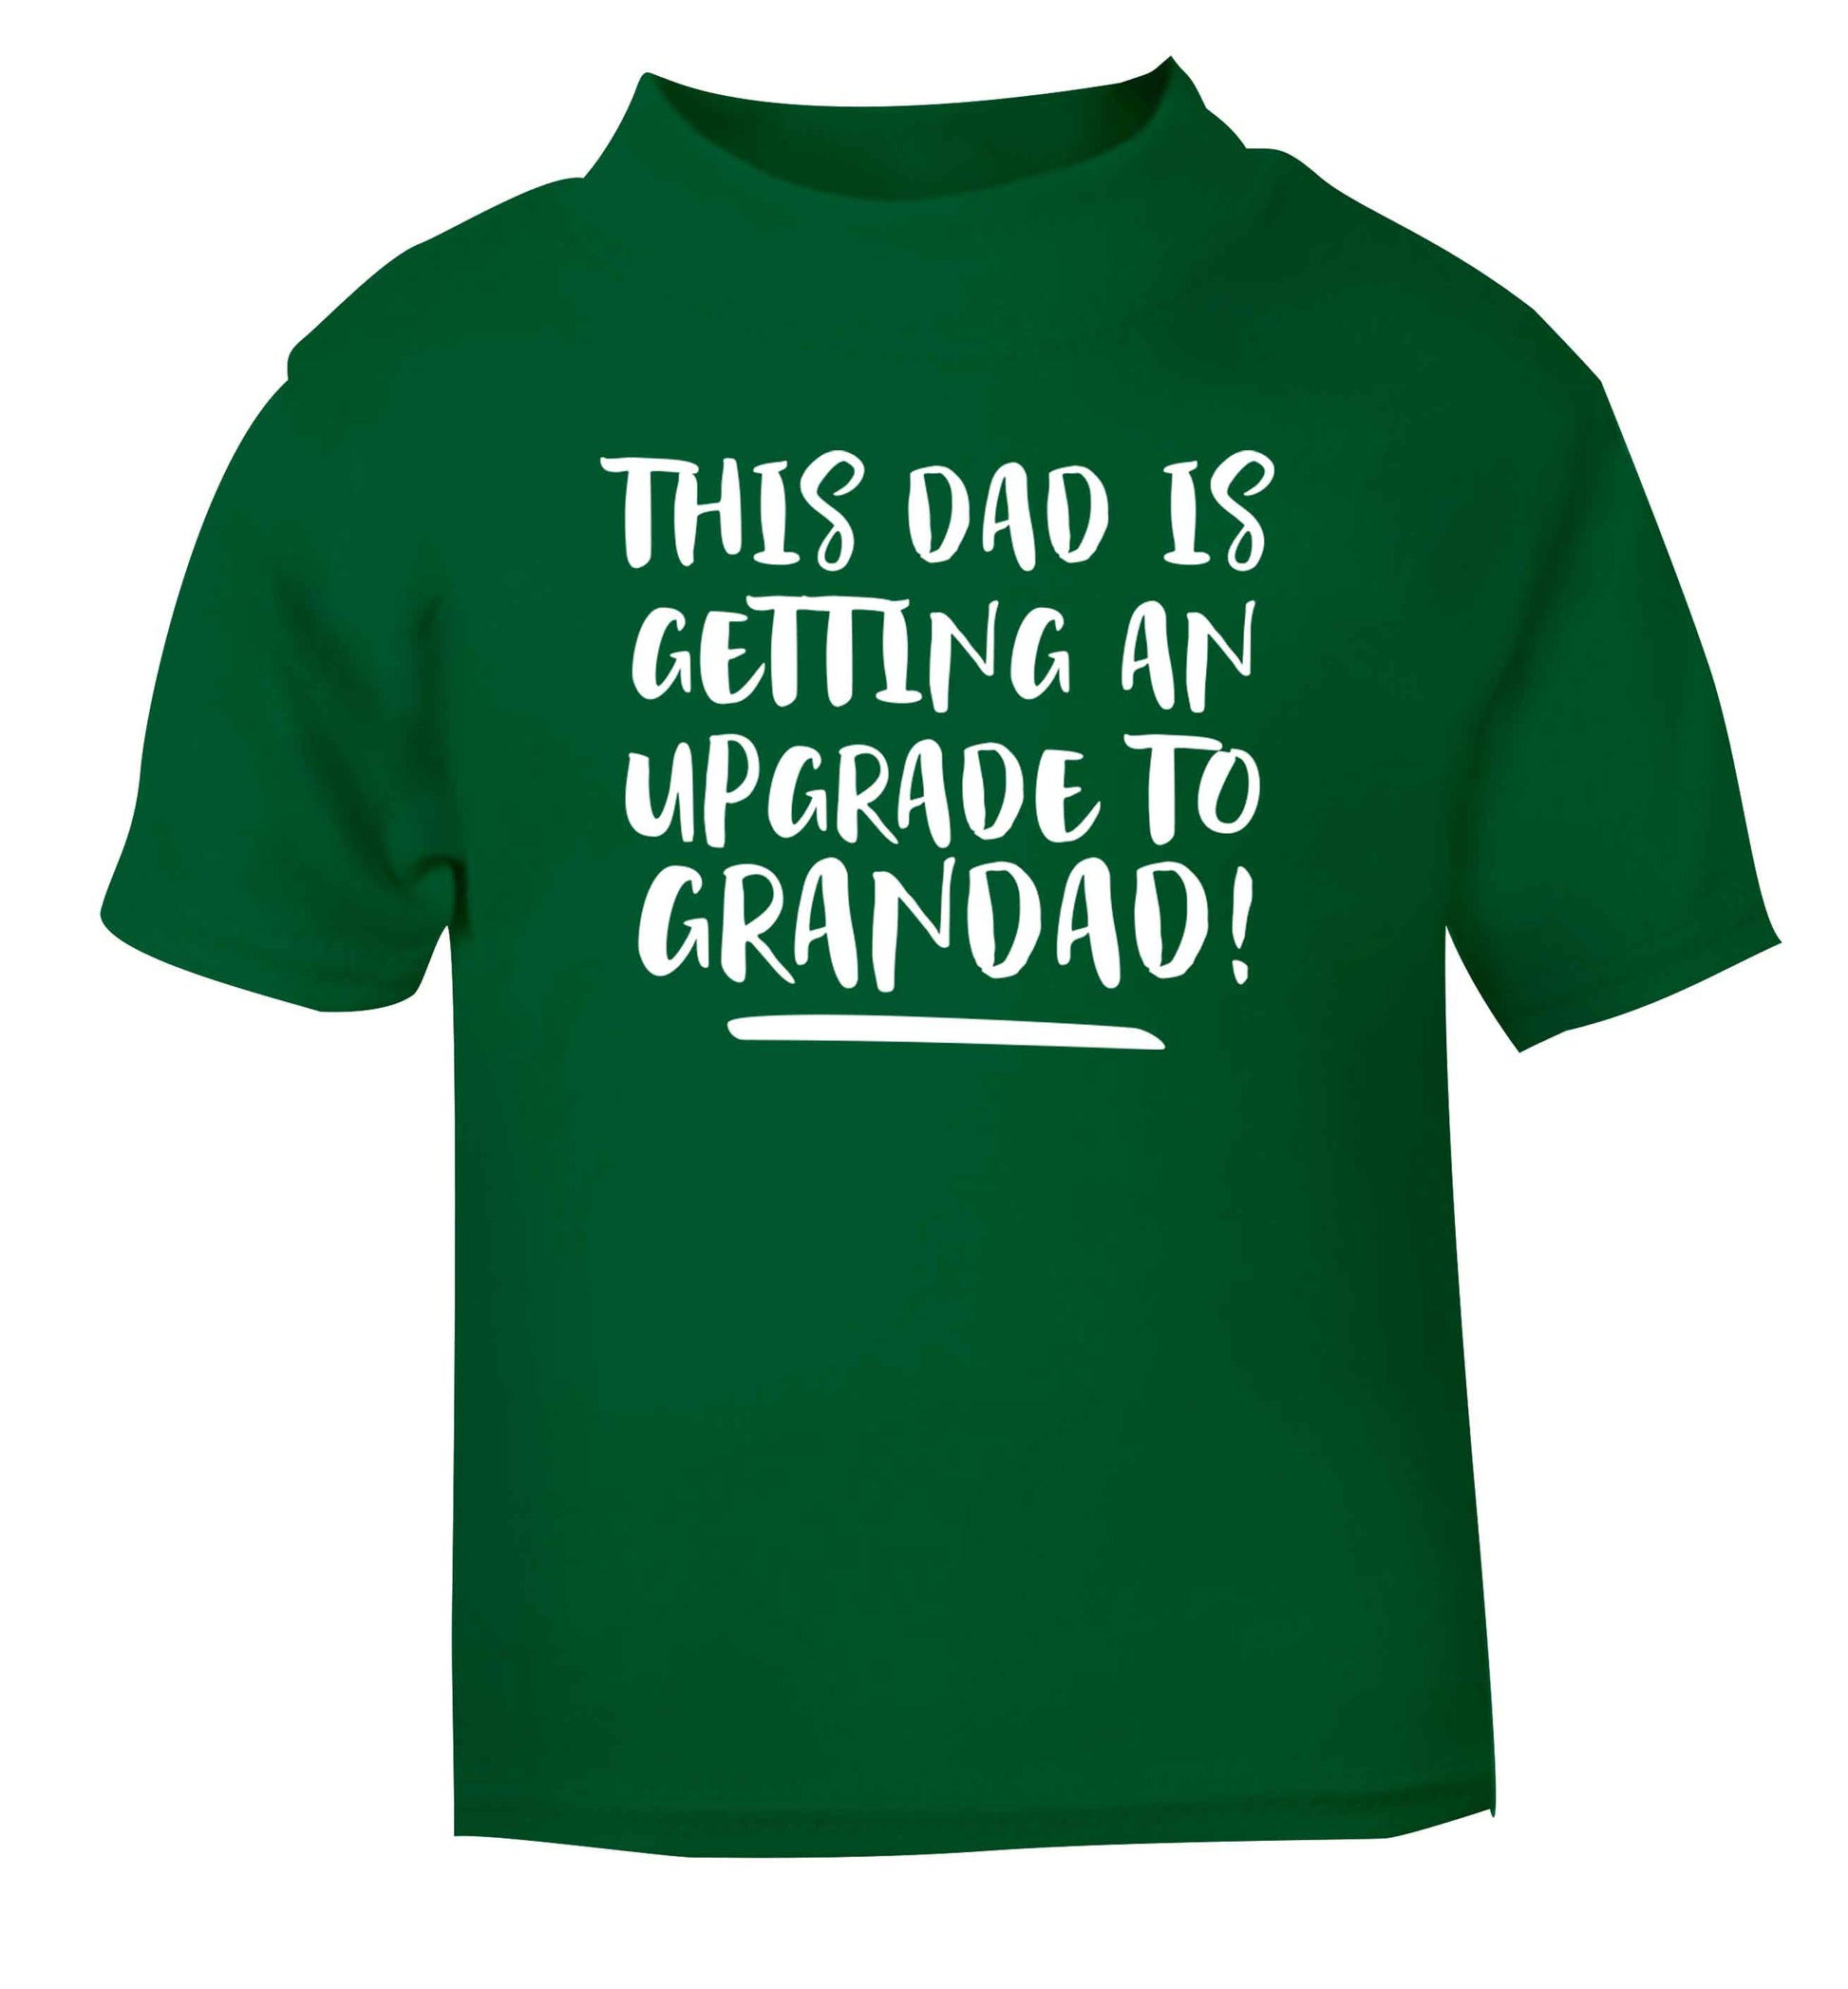 This dad is getting an upgrade to grandad! green Baby Toddler Tshirt 2 Years